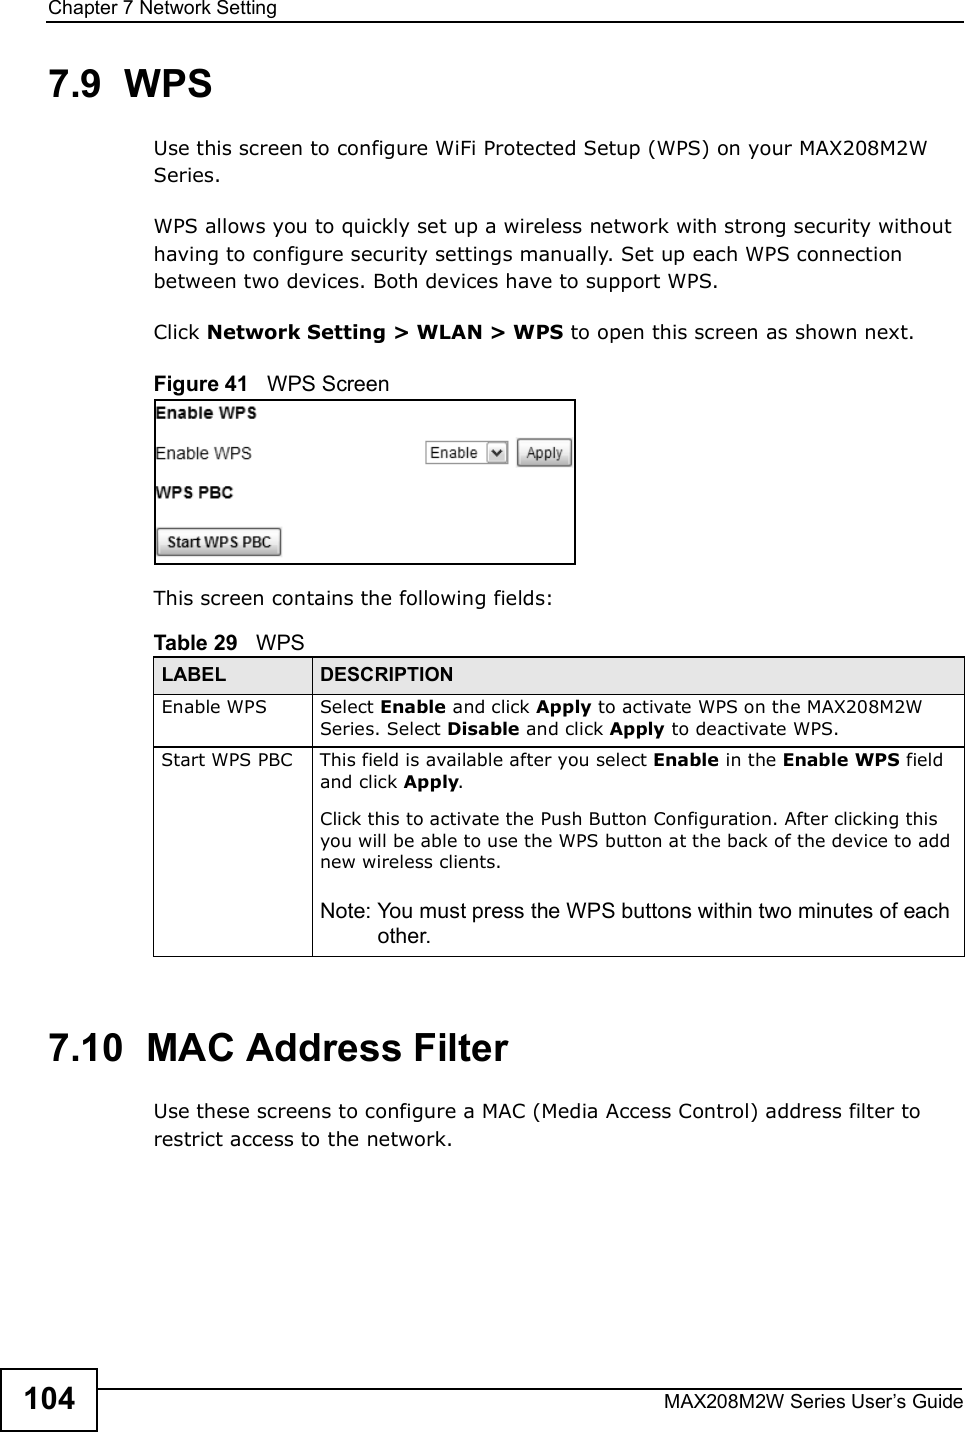 Chapter 7Network SettingMAX208M2W Series User s Guide1047.9  WPSUse this screen to configure WiFi Protected Setup (WPS) on your MAX208M2W Series.WPS allows you to quickly set up a wireless network with strong security without having to configure security settings manually. Set up each WPS connection between two devices. Both devices have to support WPS.Click Network Setting &gt; WLAN &gt; WPS to open this screen as shown next.Figure 41   WPS ScreenThis screen contains the following fields:7.10  MAC Address FilterUse these screens to configure a MAC (Media Access Control) address filter to restrict access to the network.Table 29   WPSLABEL DESCRIPTIONEnable WPSSelect Enable and click Apply to activate WPS on the MAX208M2W Series. Select Disable and click Apply to deactivate WPS.Start WPS PBCThis field is available after you select Enable in the Enable WPS field and click Apply.Click this to activate the Push Button Configuration. After clicking this you will be able to use the WPS button at the back of the device to add new wireless clients.Note: You must press the WPS buttons within two minutes of each other.